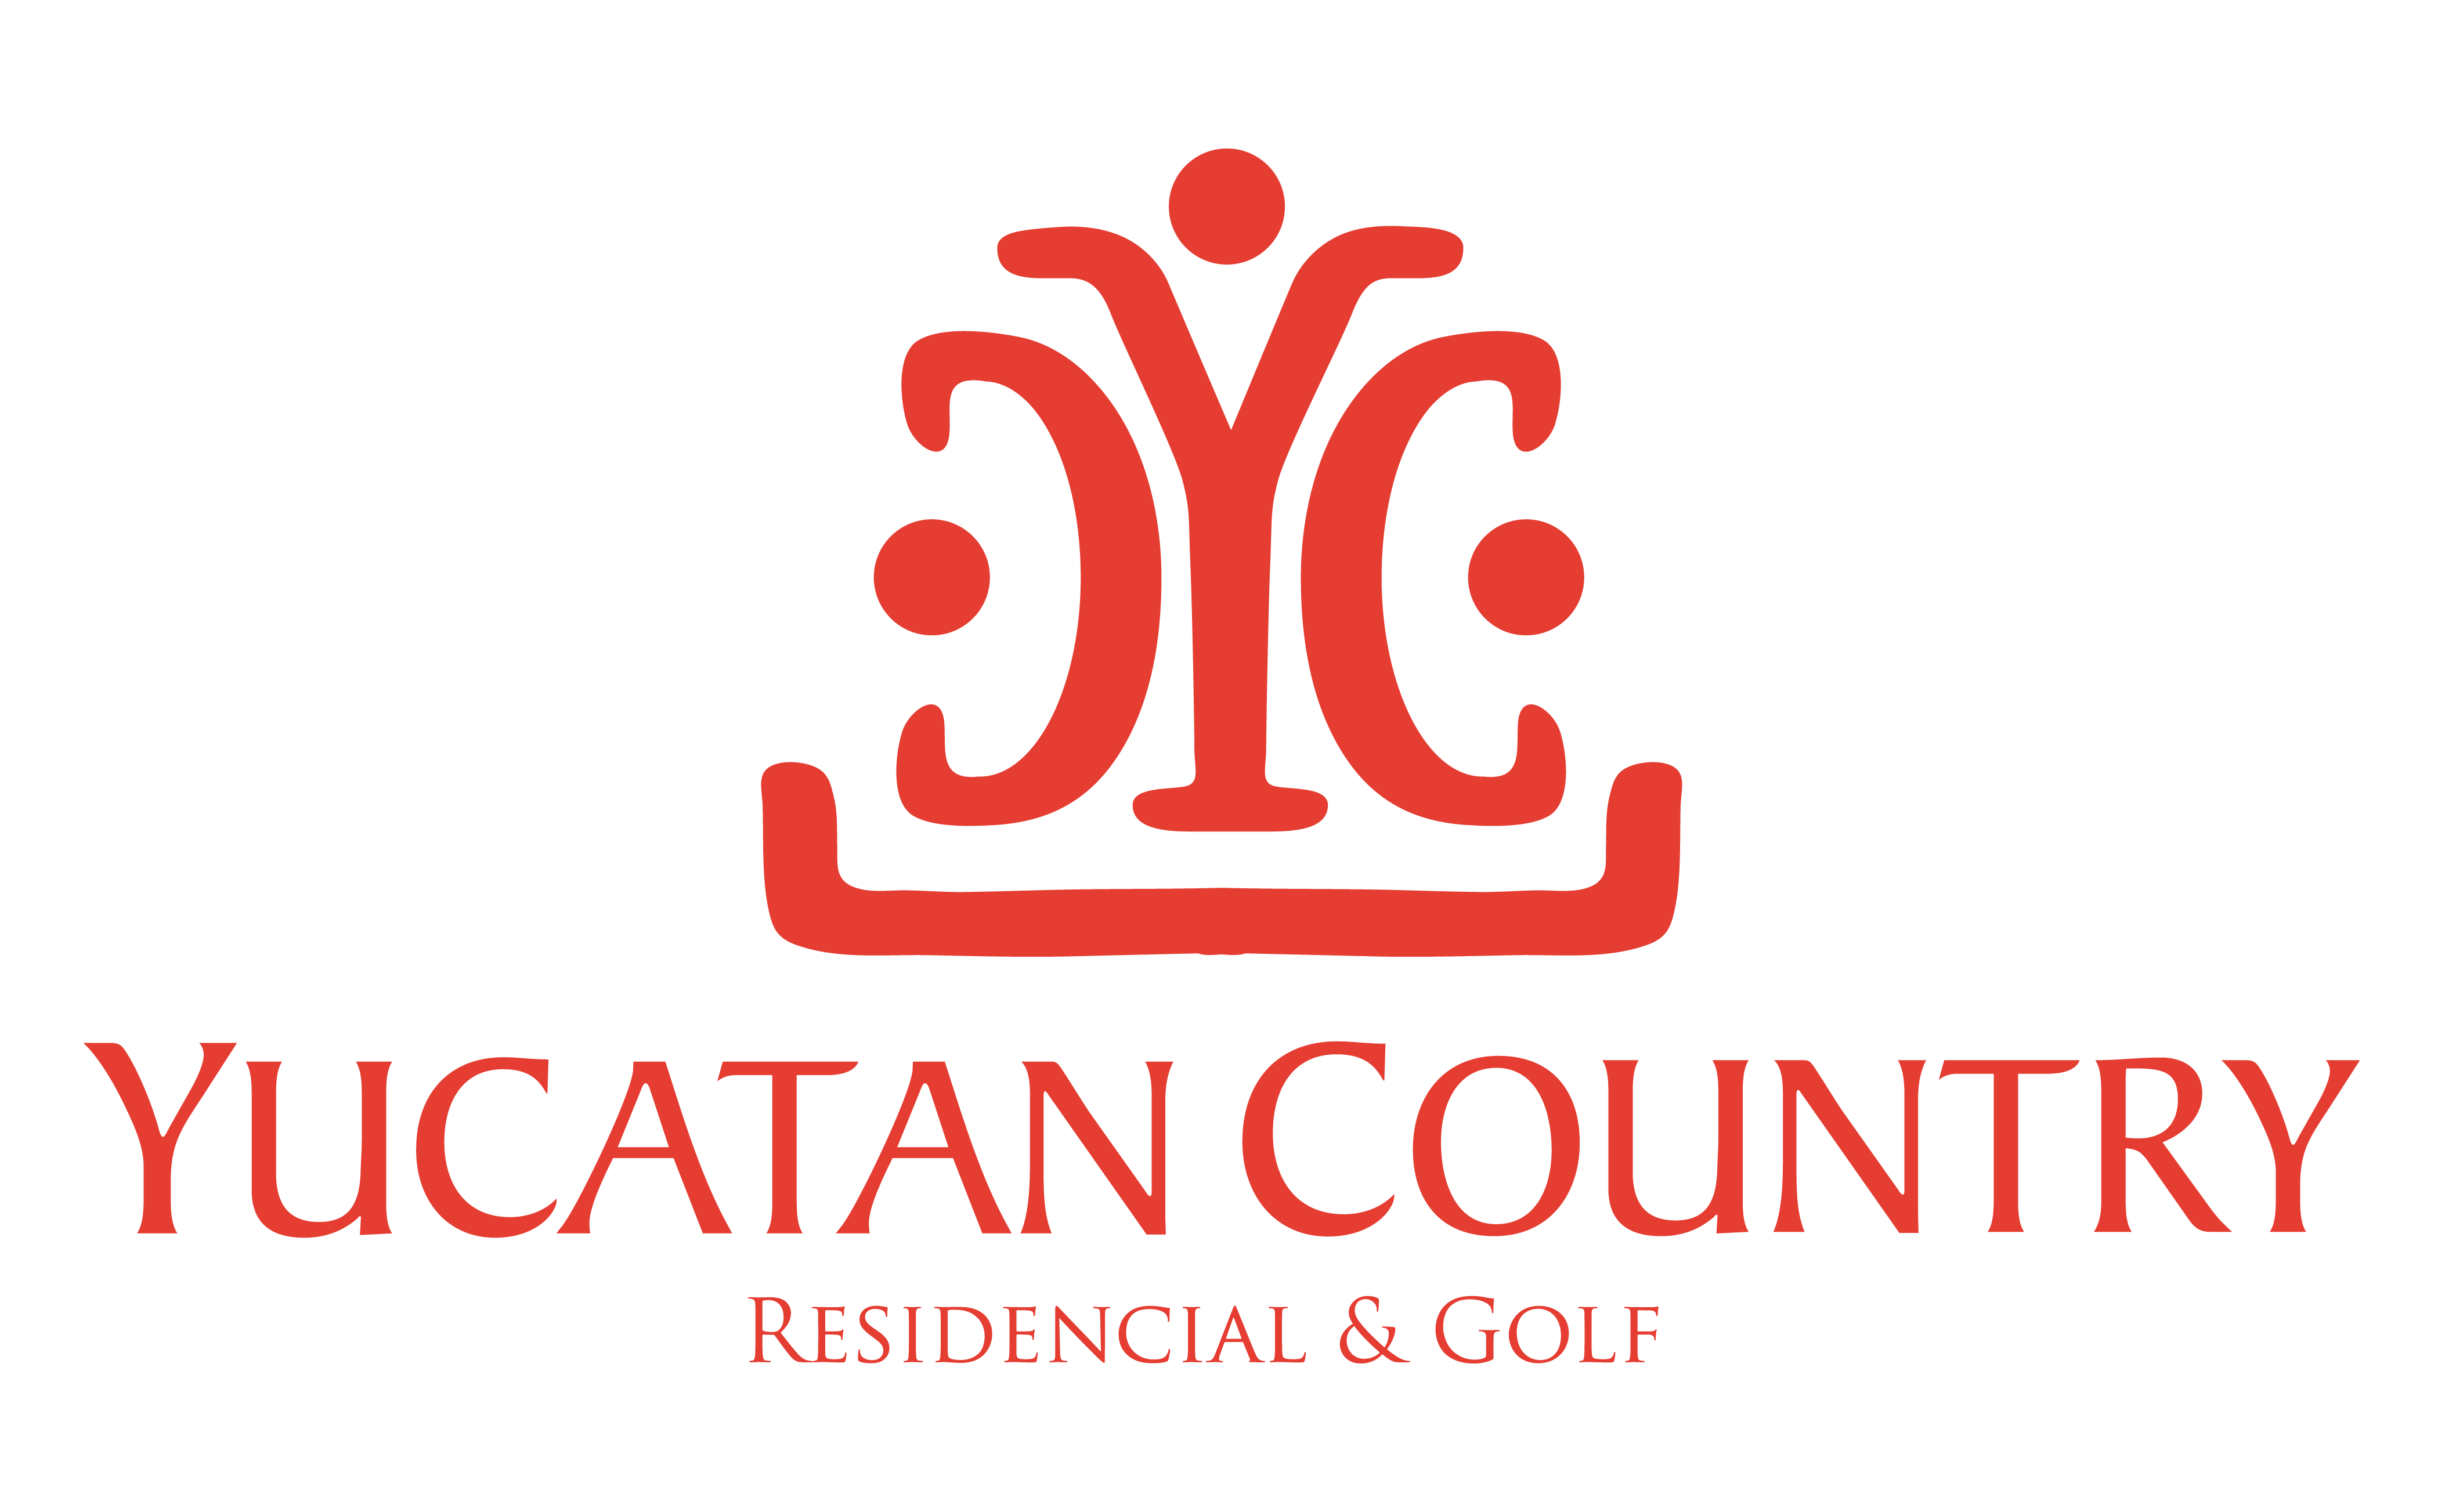 Yucatan Country Club, residential and golf.